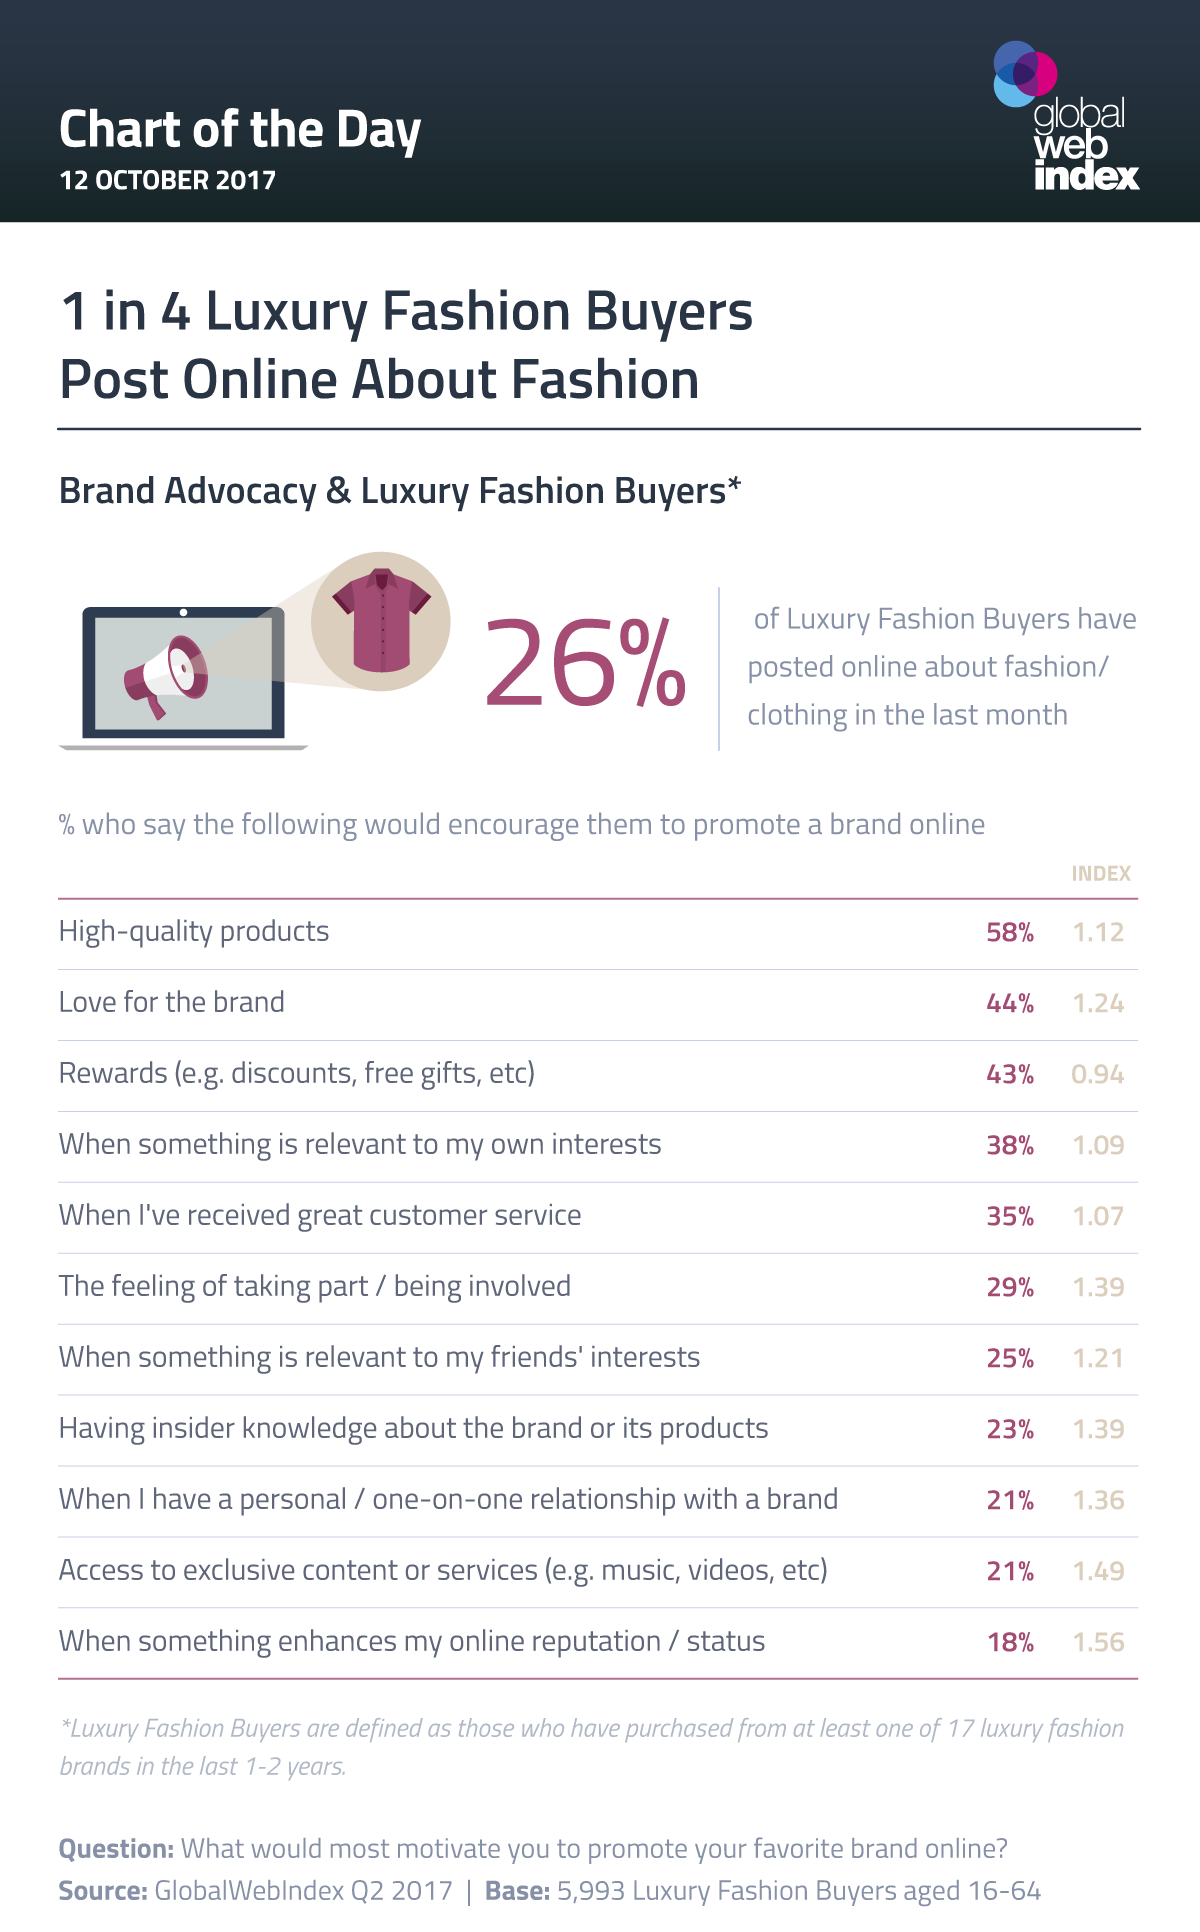 1 in 4 Luxury Fashion Buyers Post Online About Fashion